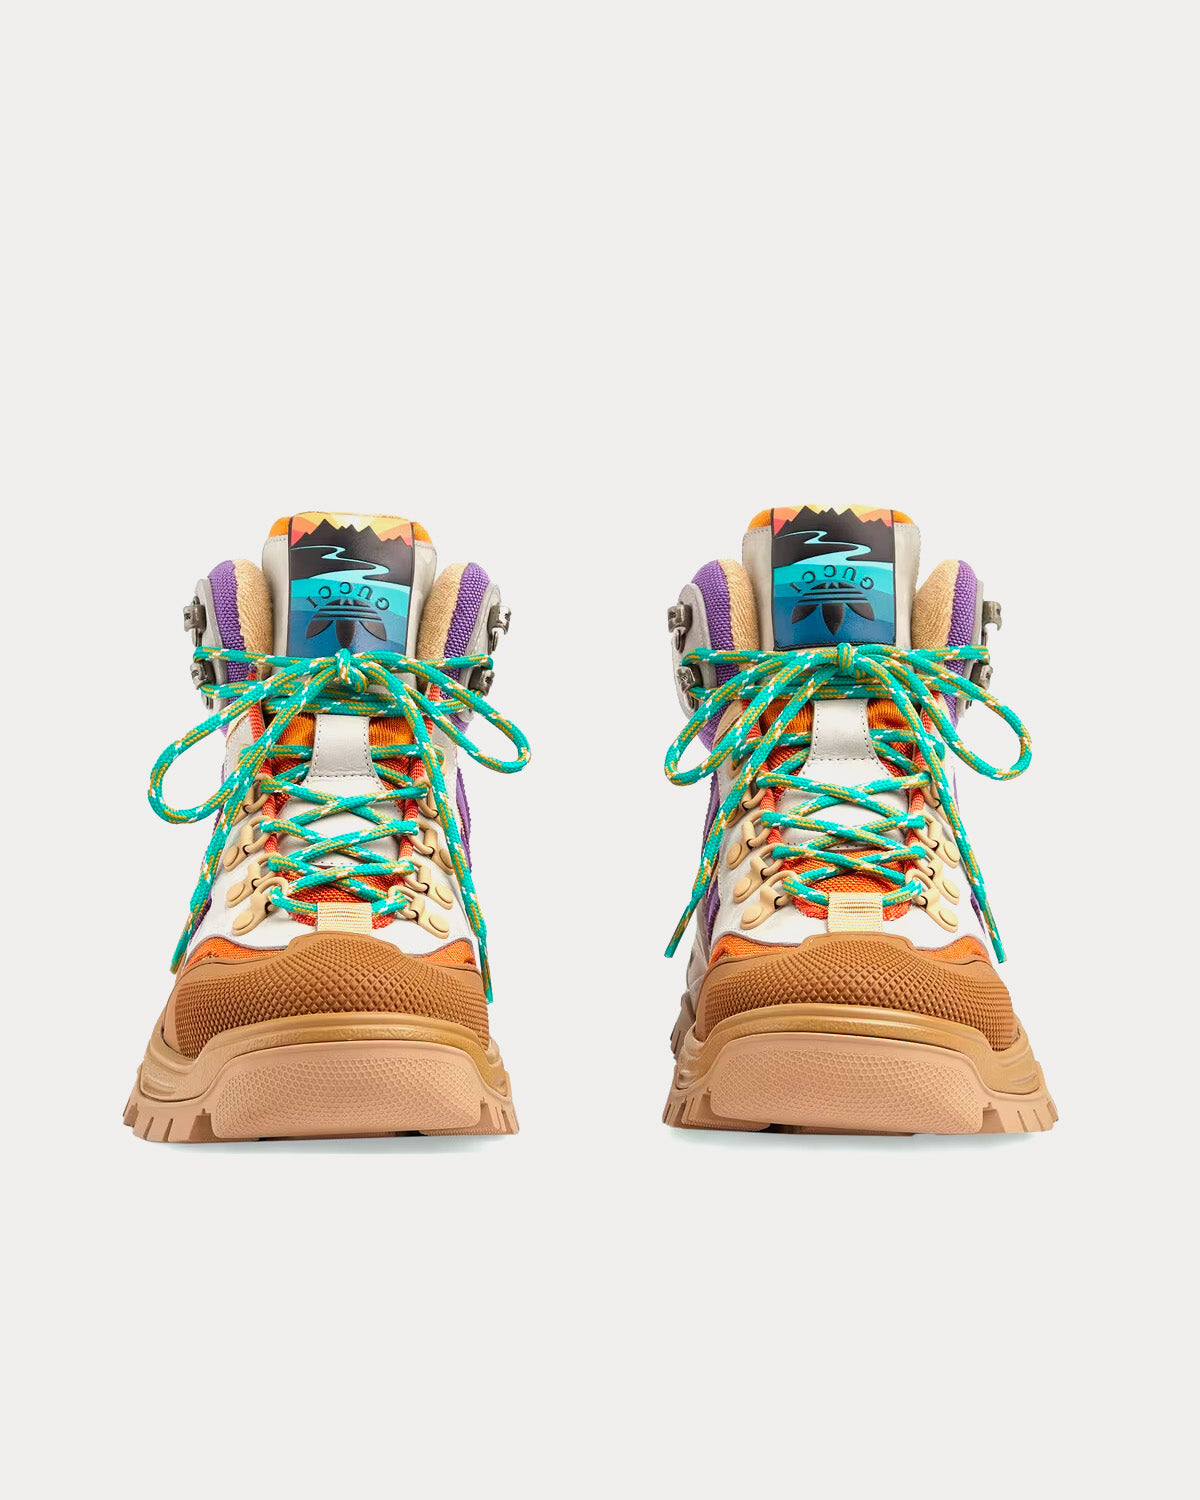 Adidas x Gucci - Lace-Up Technical Canvas Beige / Orange / Purple High Top Sneakers